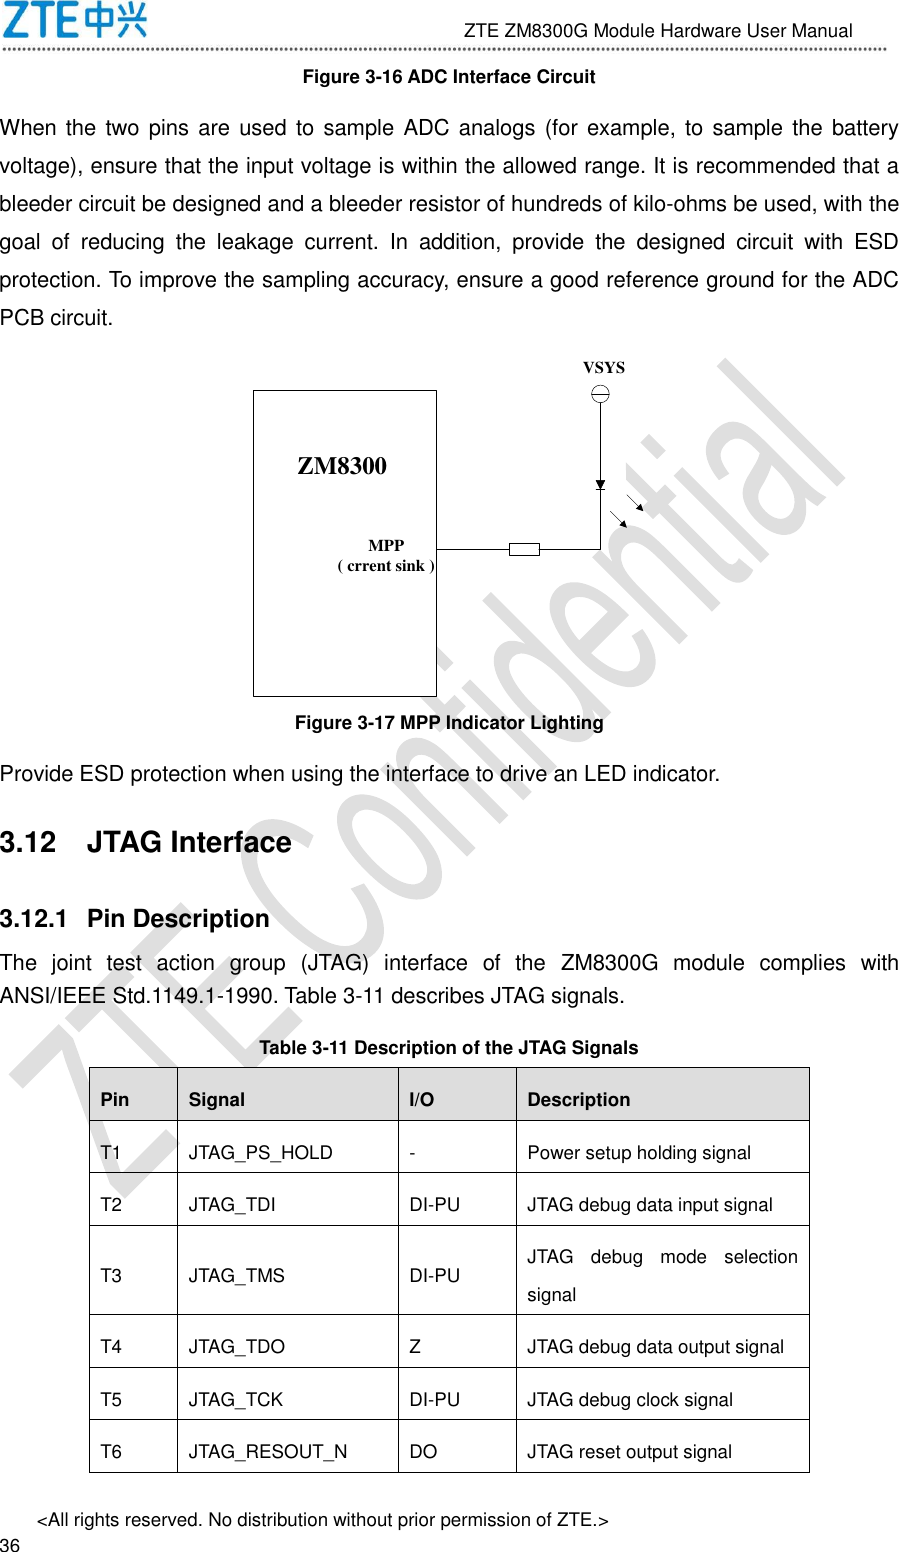                              ZTE ZM8300G Module Hardware User Manual &lt;All rights reserved. No distribution without prior permission of ZTE.&gt;                                                               36 Figure 3-16 ADC Interface Circuit When the two pins are used to sample ADC analogs (for  example, to  sample the  battery voltage), ensure that the input voltage is within the allowed range. It is recommended that a bleeder circuit be designed and a bleeder resistor of hundreds of kilo-ohms be used, with the goal  of  reducing  the  leakage  current.  In  addition,  provide  the  designed  circuit  with  ESD protection. To improve the sampling accuracy, ensure a good reference ground for the ADC PCB circuit. ZM8300VSYSMPP( crrent sink ) Figure 3-17 MPP Indicator Lighting Provide ESD protection when using the interface to drive an LED indicator. 3.12  JTAG Interface 3.12.1  Pin Description The  joint  test  action  group  (JTAG)  interface  of  the  ZM8300G  module  complies  with ANSI/IEEE Std.1149.1-1990. Table 3-11 describes JTAG signals. Table 3-11 Description of the JTAG Signals Pin Signal I/O Description T1 JTAG_PS_HOLD - Power setup holding signal T2 JTAG_TDI DI-PU JTAG debug data input signal T3 JTAG_TMS DI-PU JTAG  debug  mode  selection signal T4 JTAG_TDO Z JTAG debug data output signal T5 JTAG_TCK DI-PU JTAG debug clock signal T6 JTAG_RESOUT_N DO JTAG reset output signal 